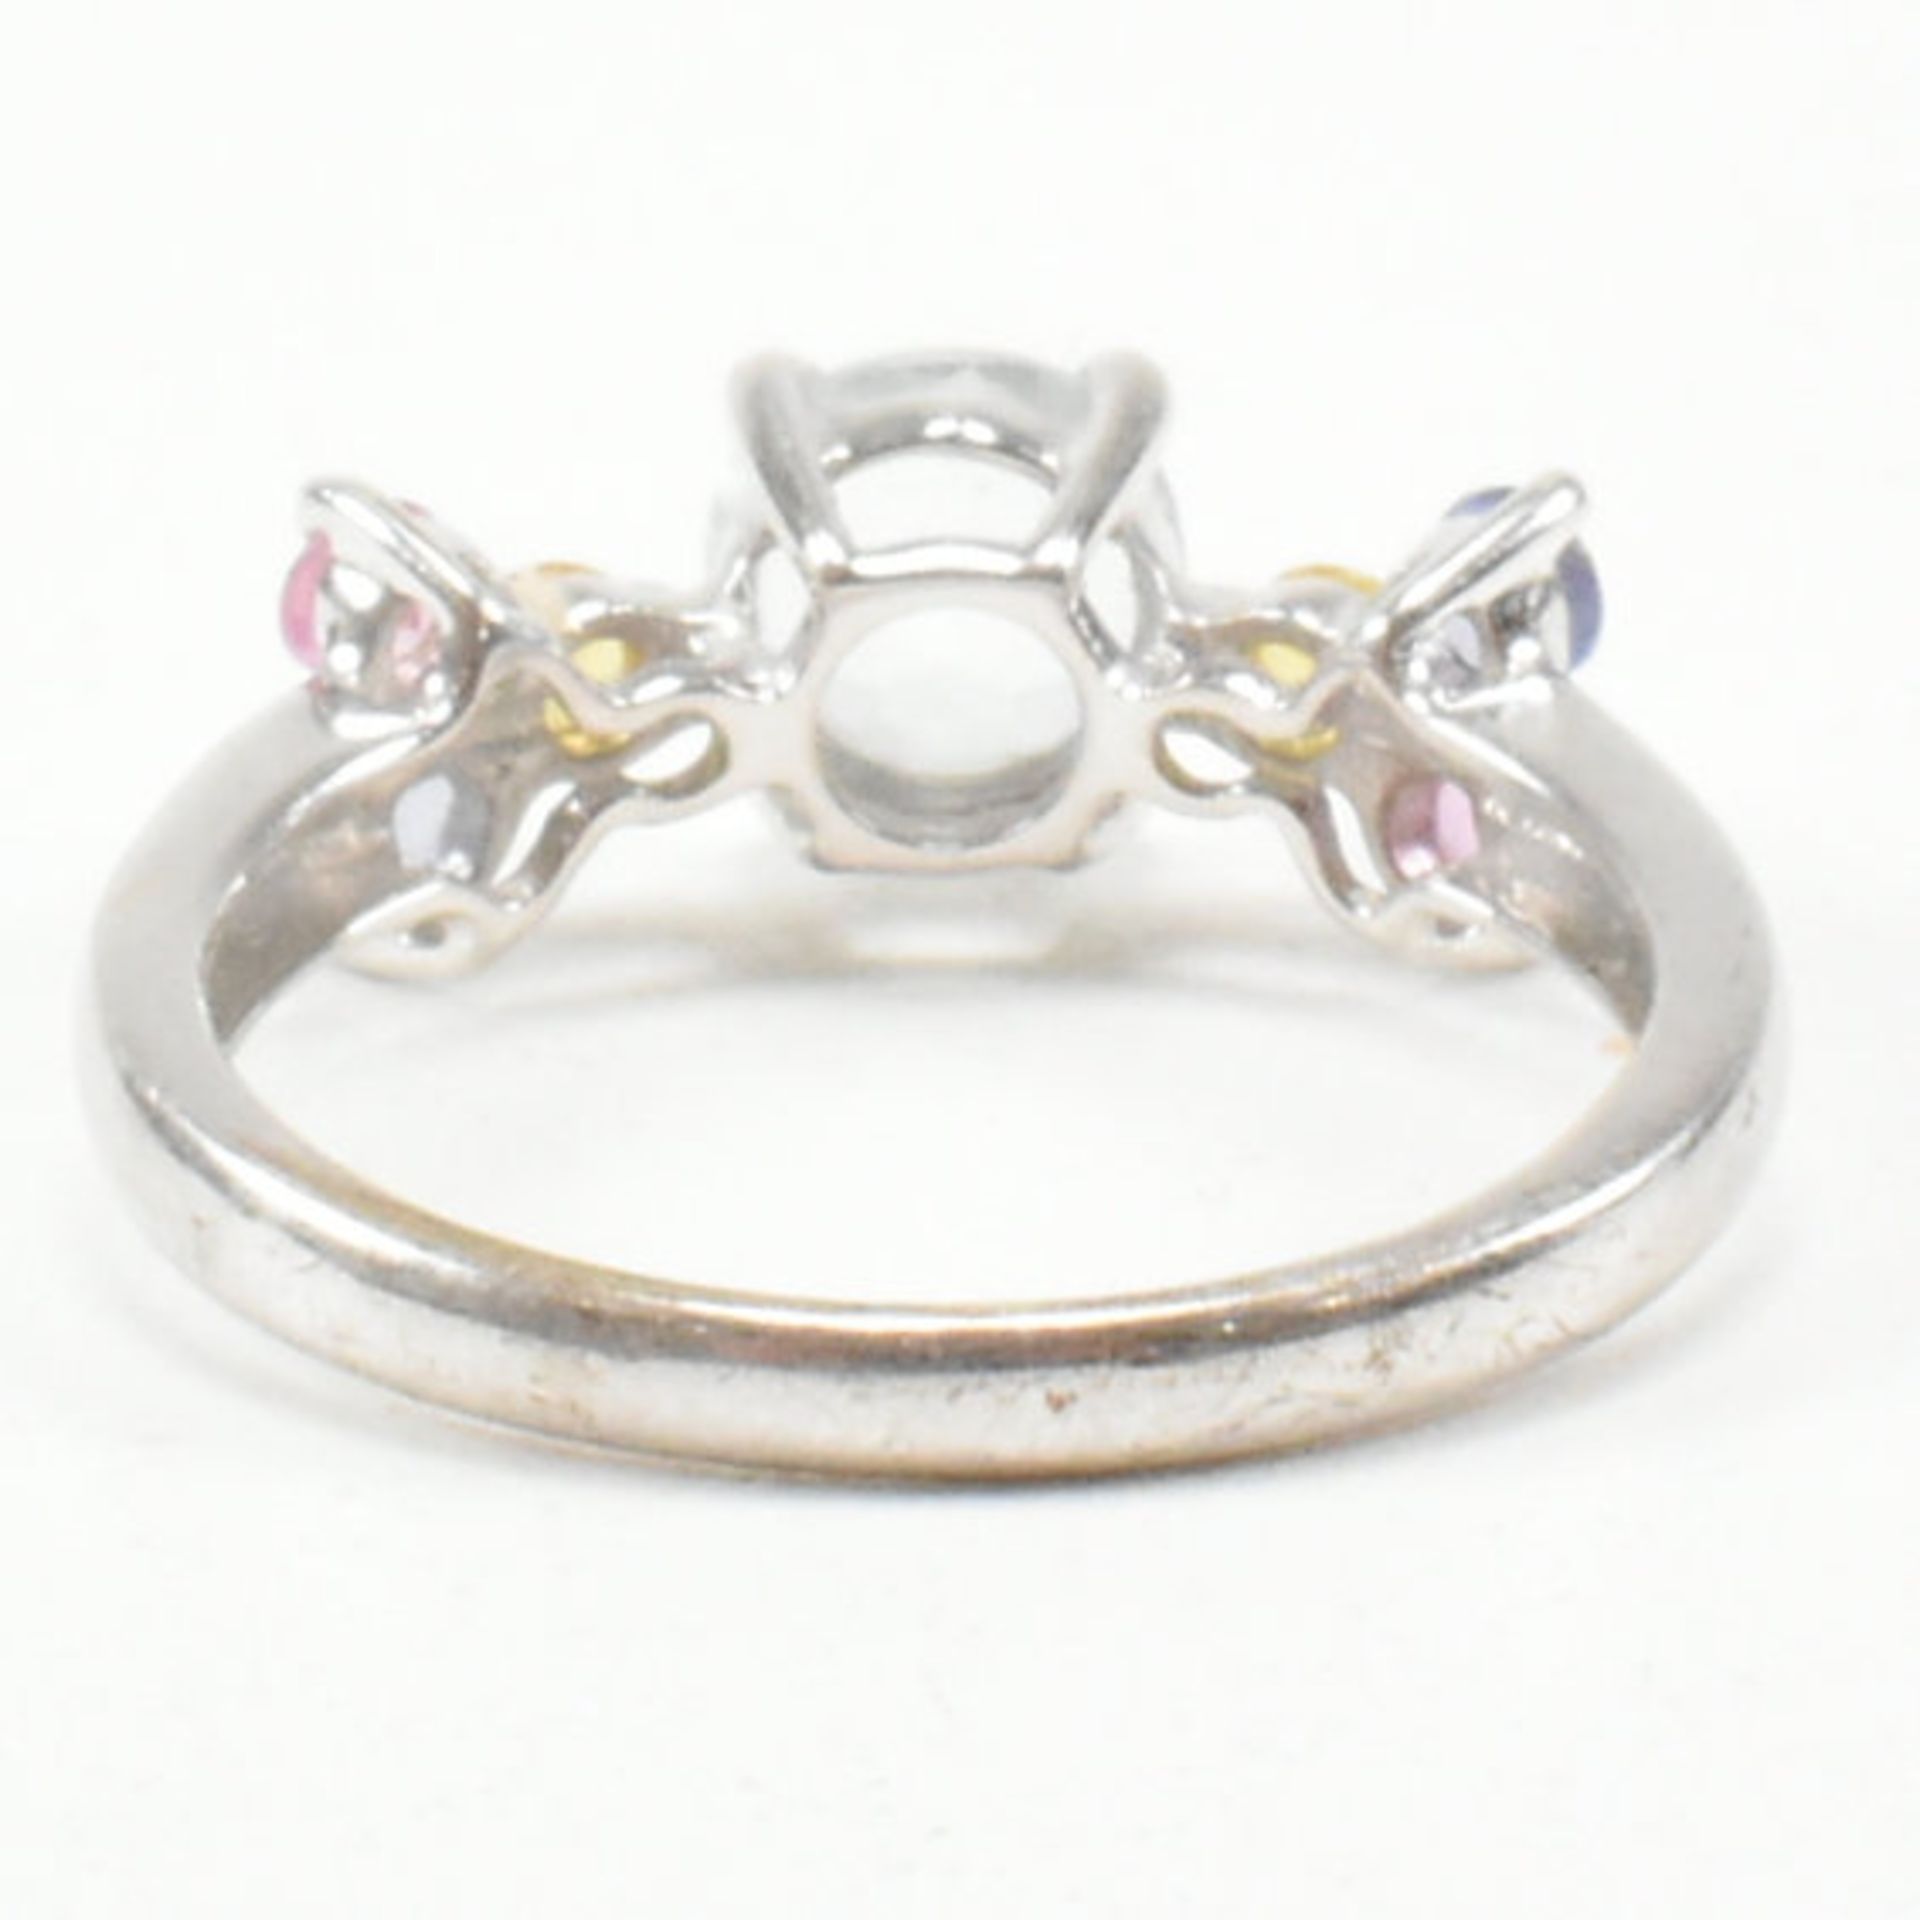 HALLMARKED 9CT WHITE GOLD AQUAMARINE RUBY & SAPPHIRE CLUSTER RING - Image 4 of 6